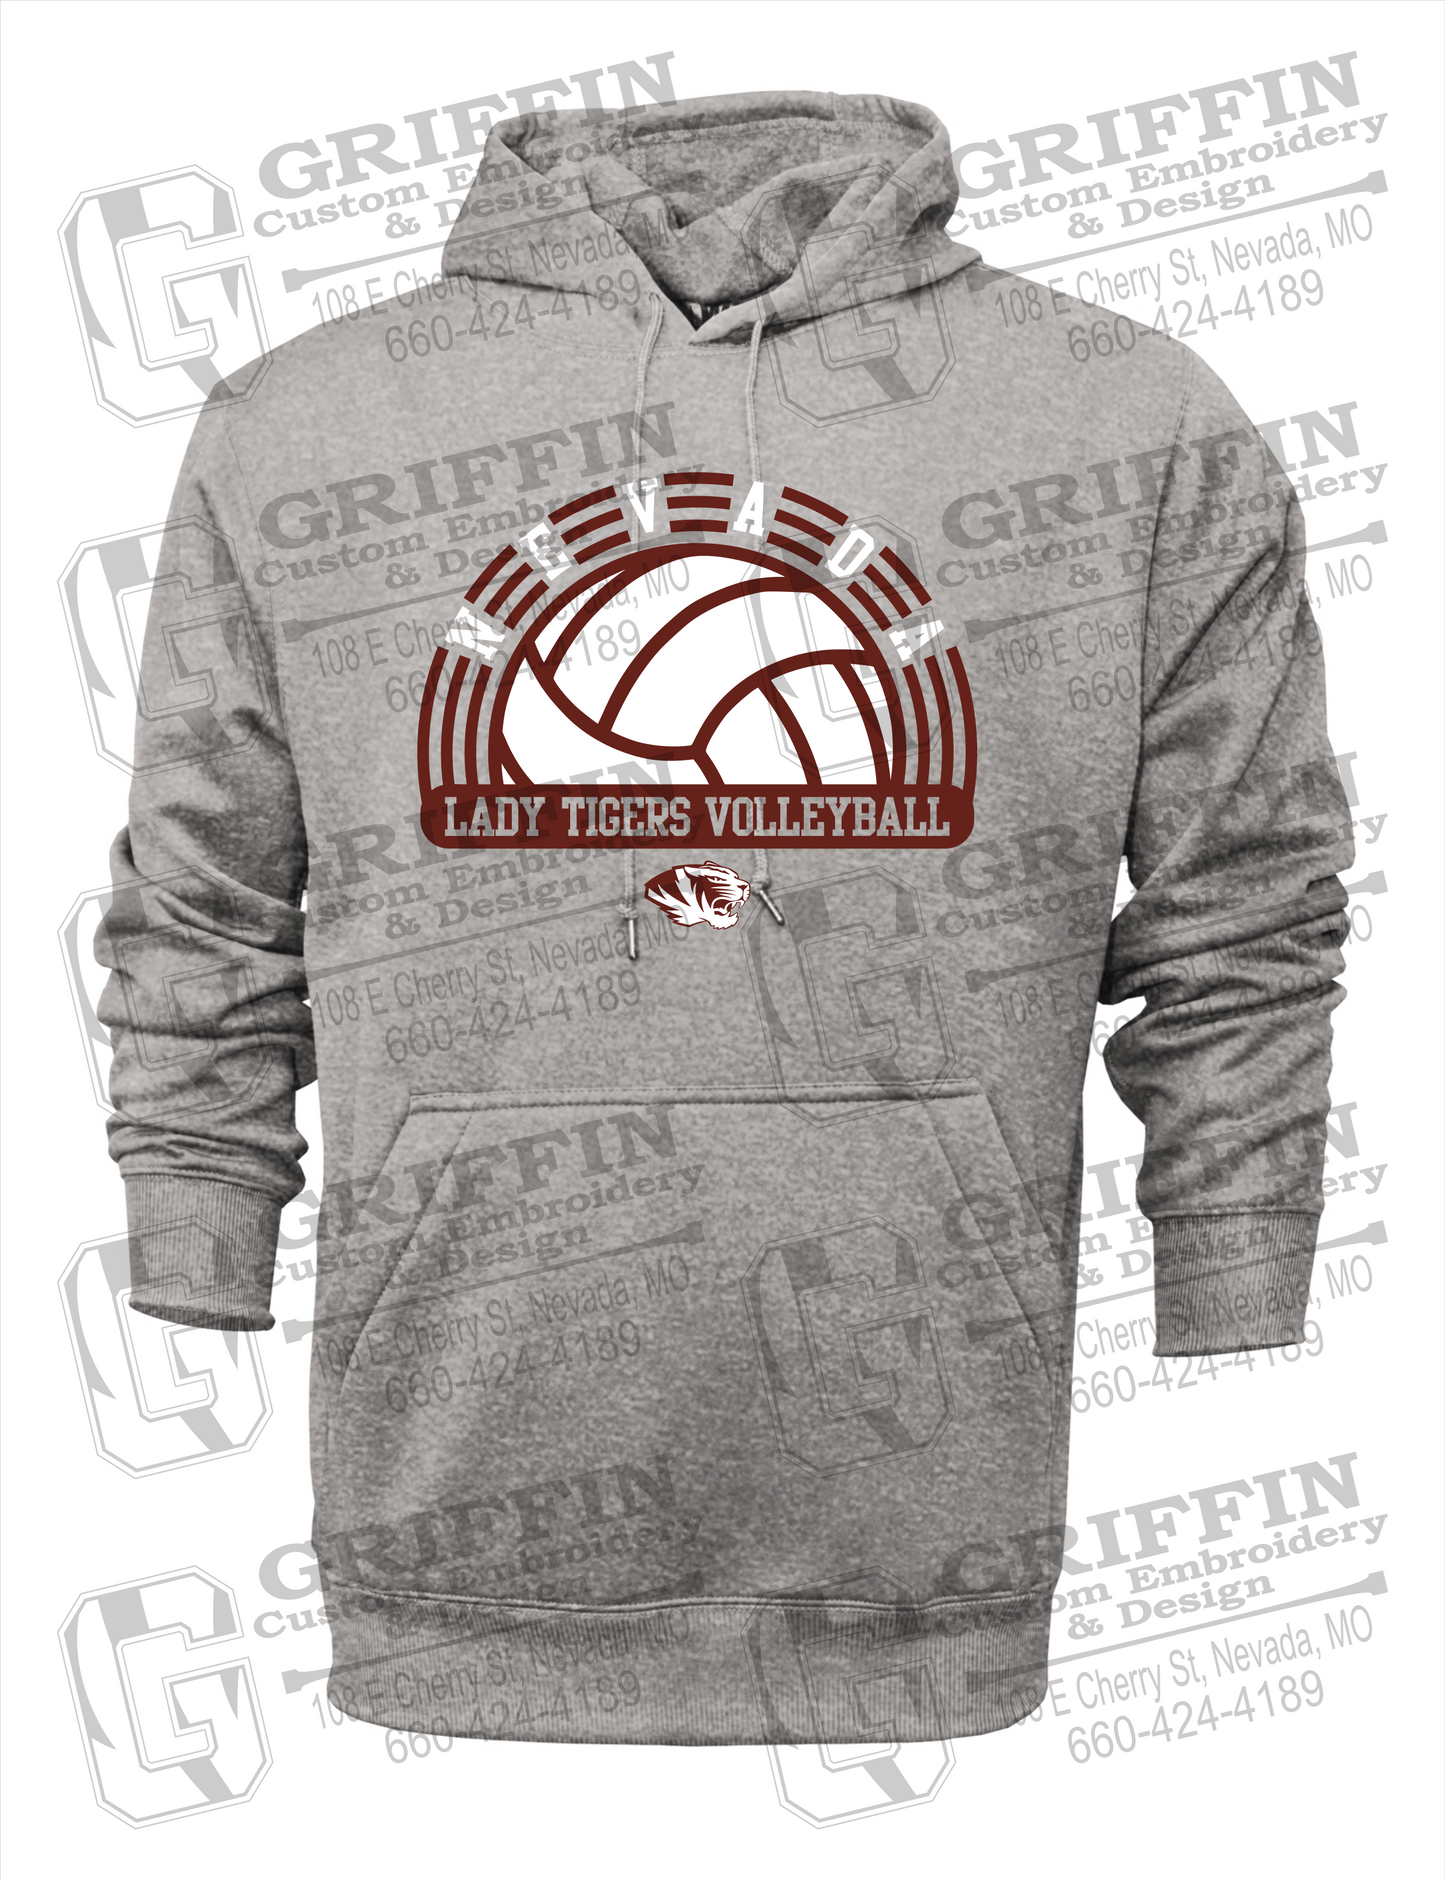 Nevada Tigers 23-R Hoodie - Volleyball